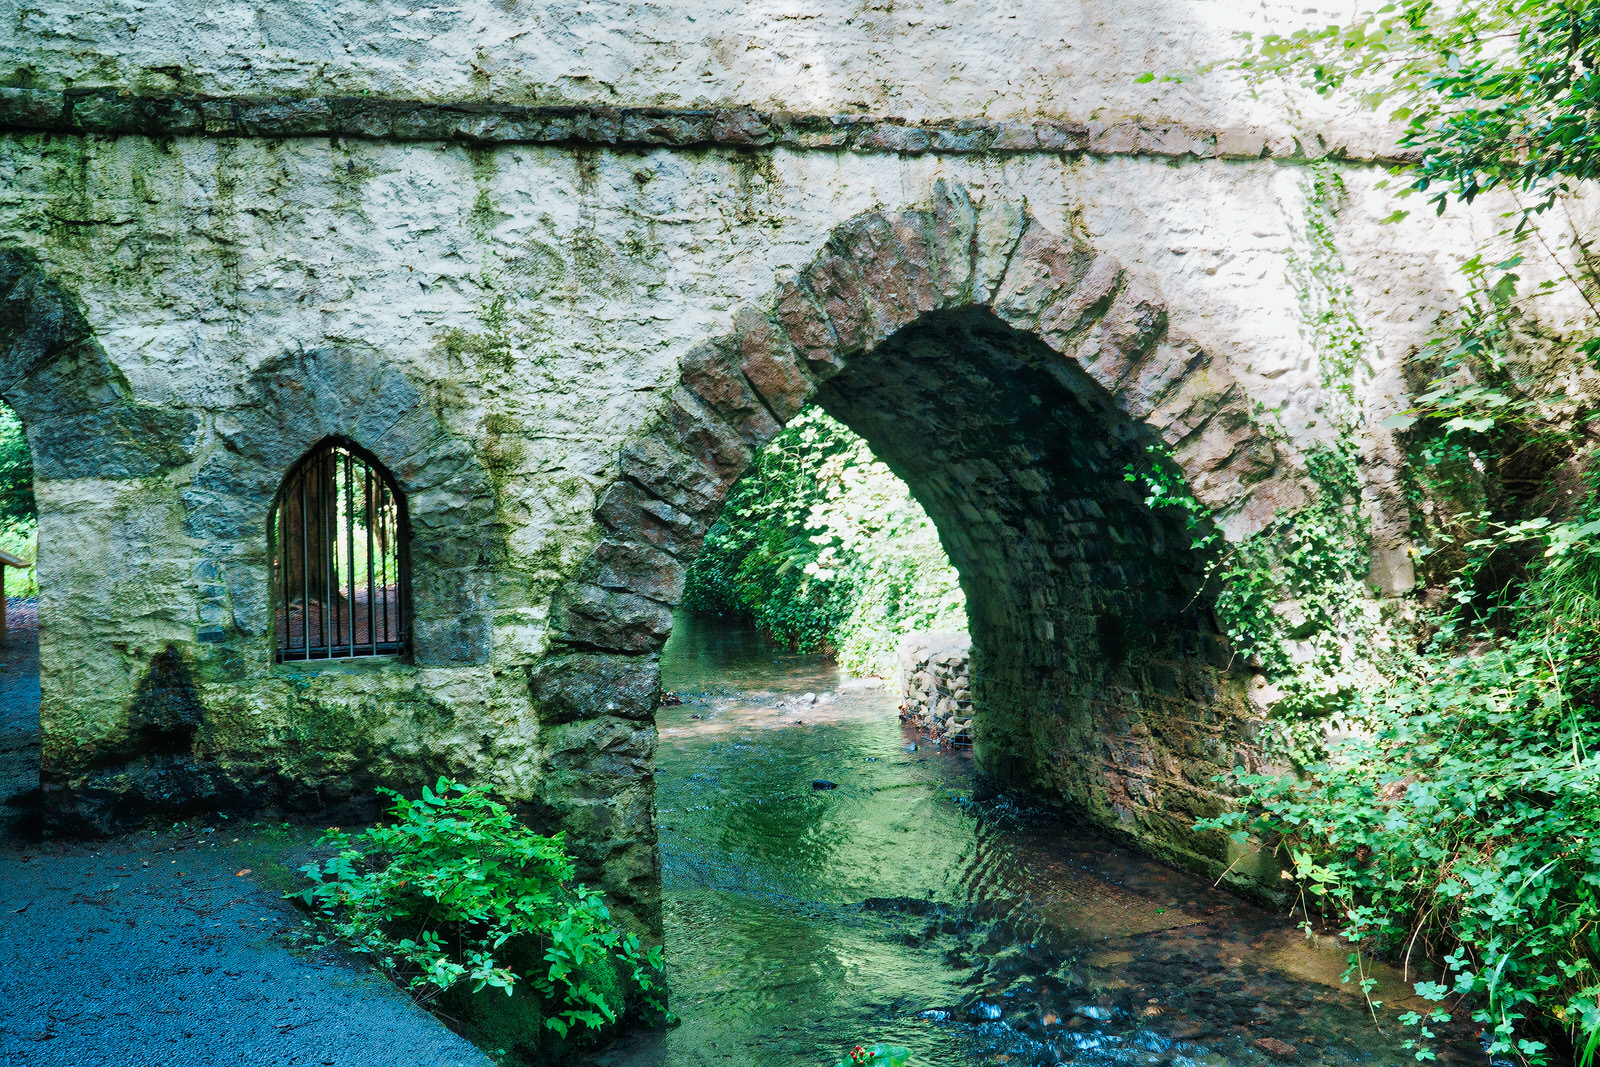 THIS IS CURRENTLY DESCRIBED AS THE GOTHIC BRIDGE [MANY GUIDES REFER TO IT AS THE BRIDGE AND HERMITAGE] 009